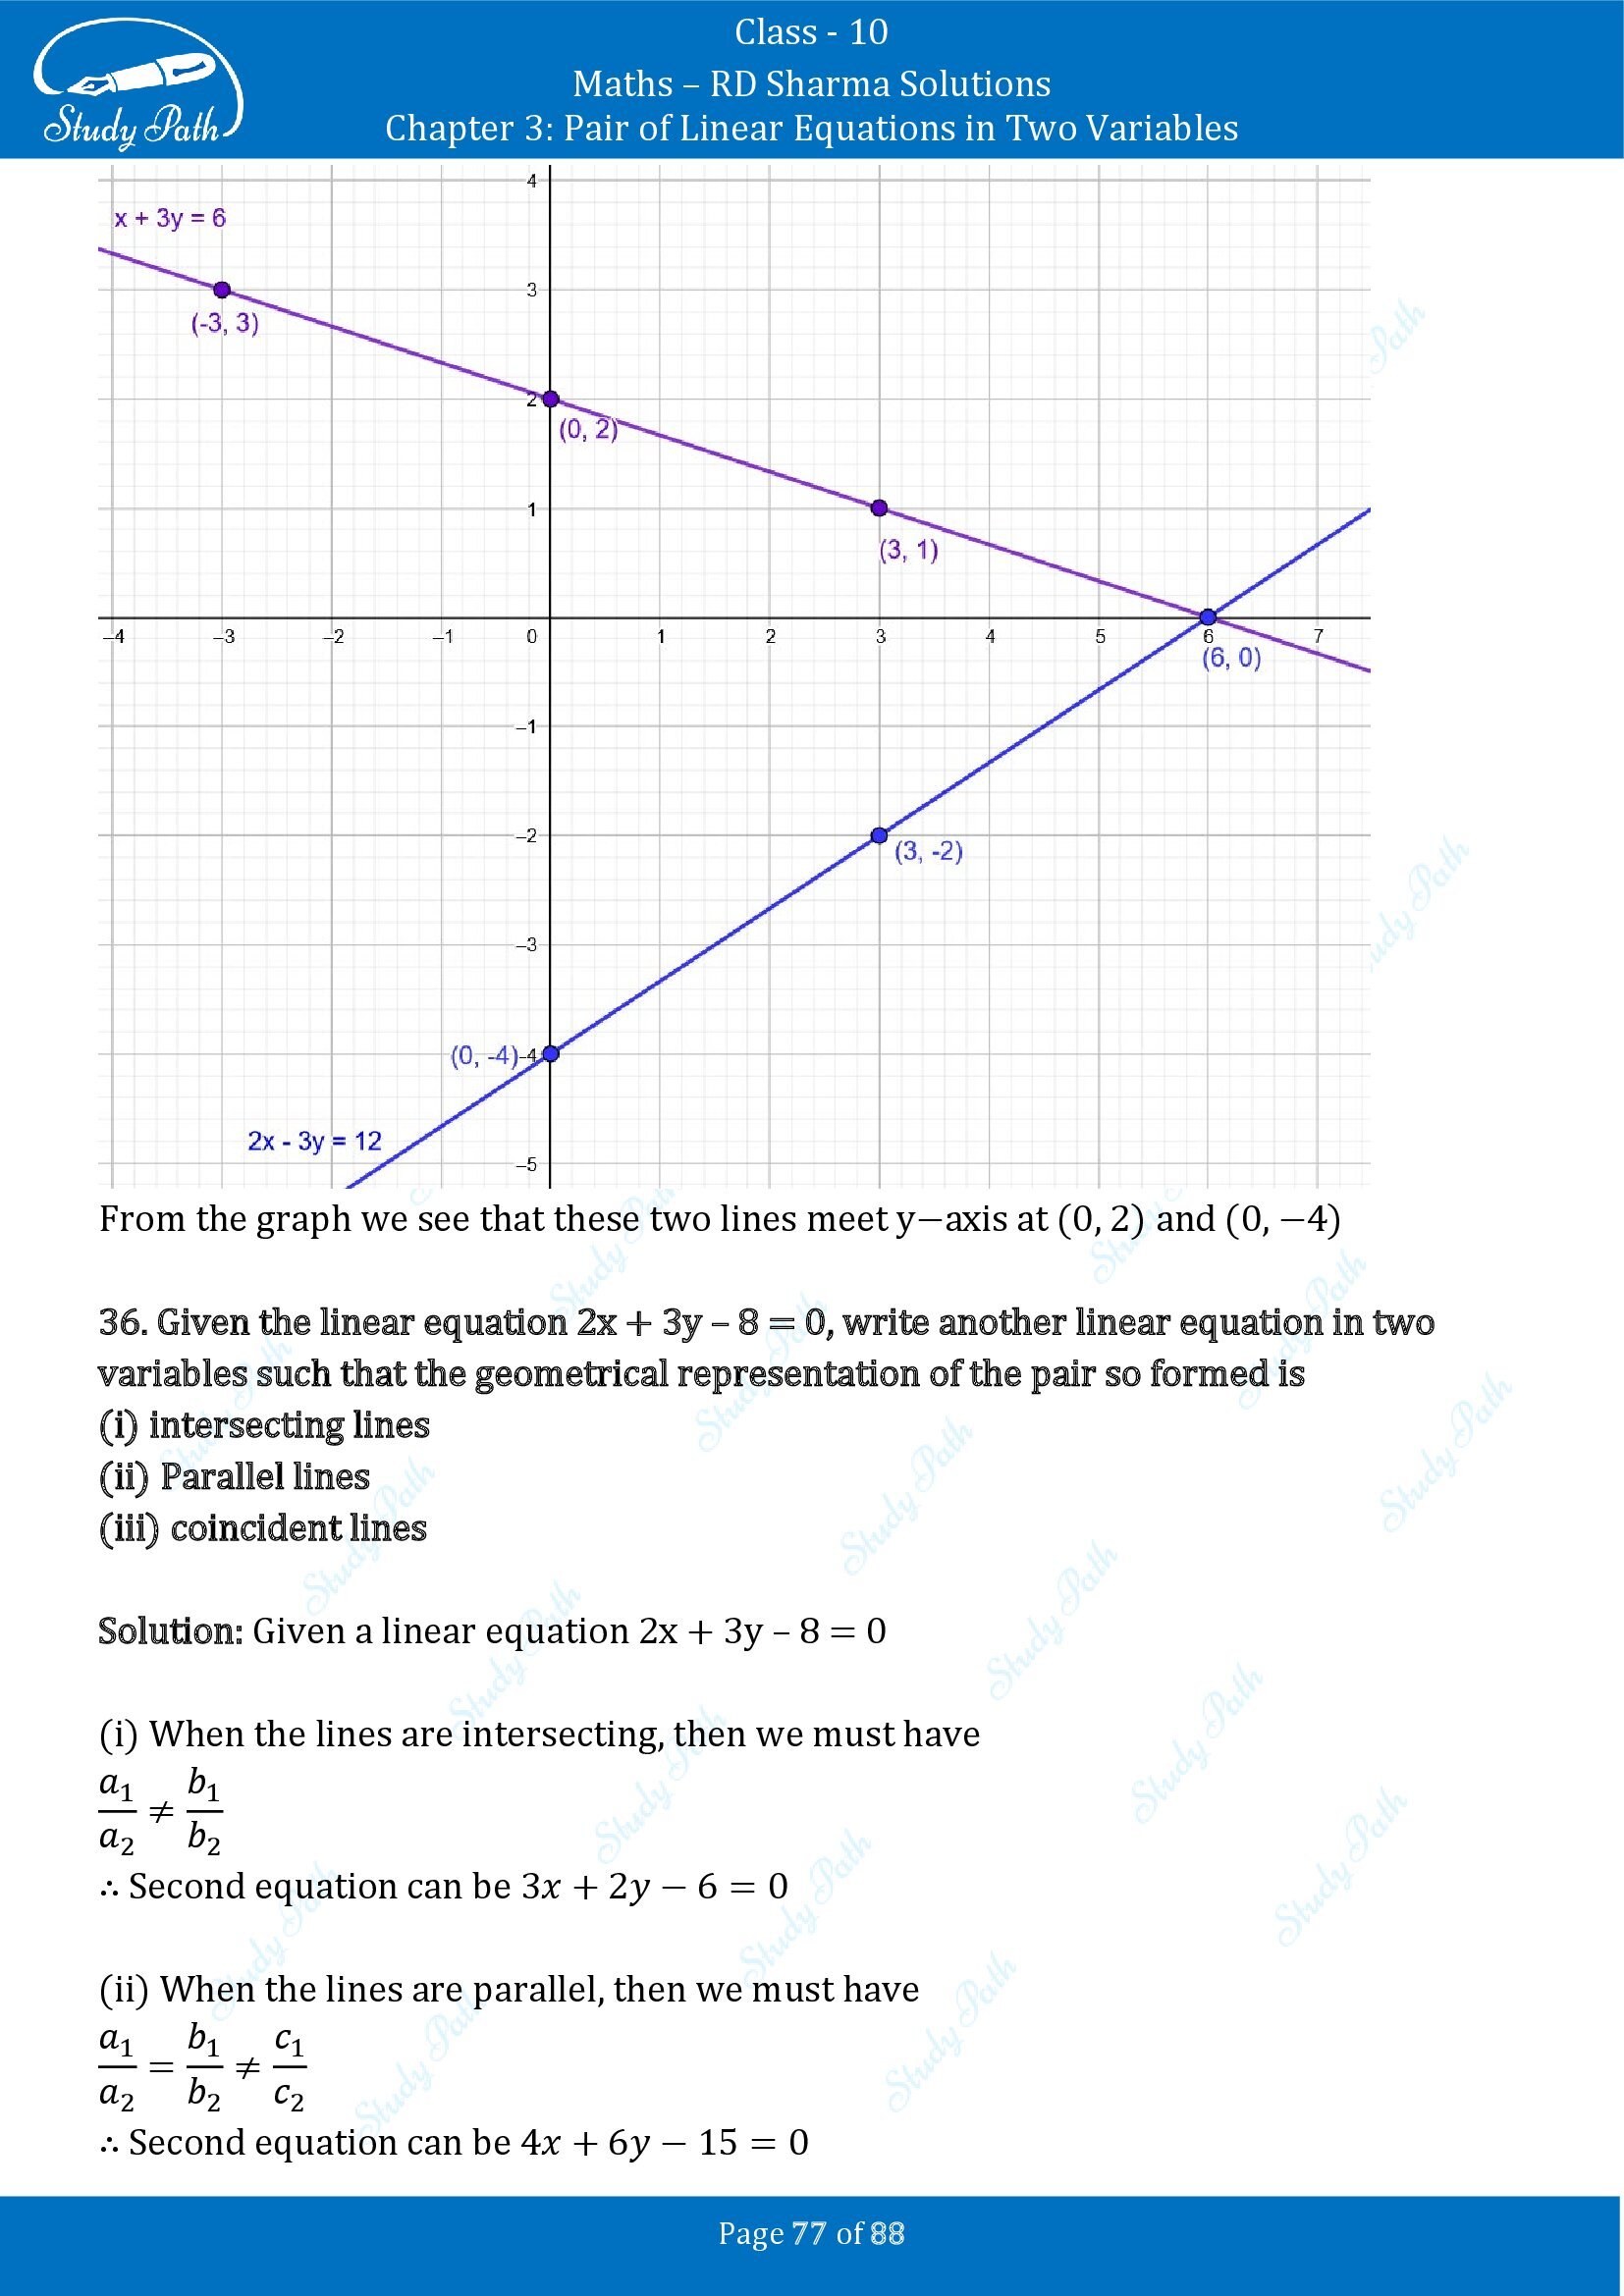 RD Sharma Solutions Class 10 Chapter 3 Pair of Linear Equations in Two Variables Exercise 3.2 00077